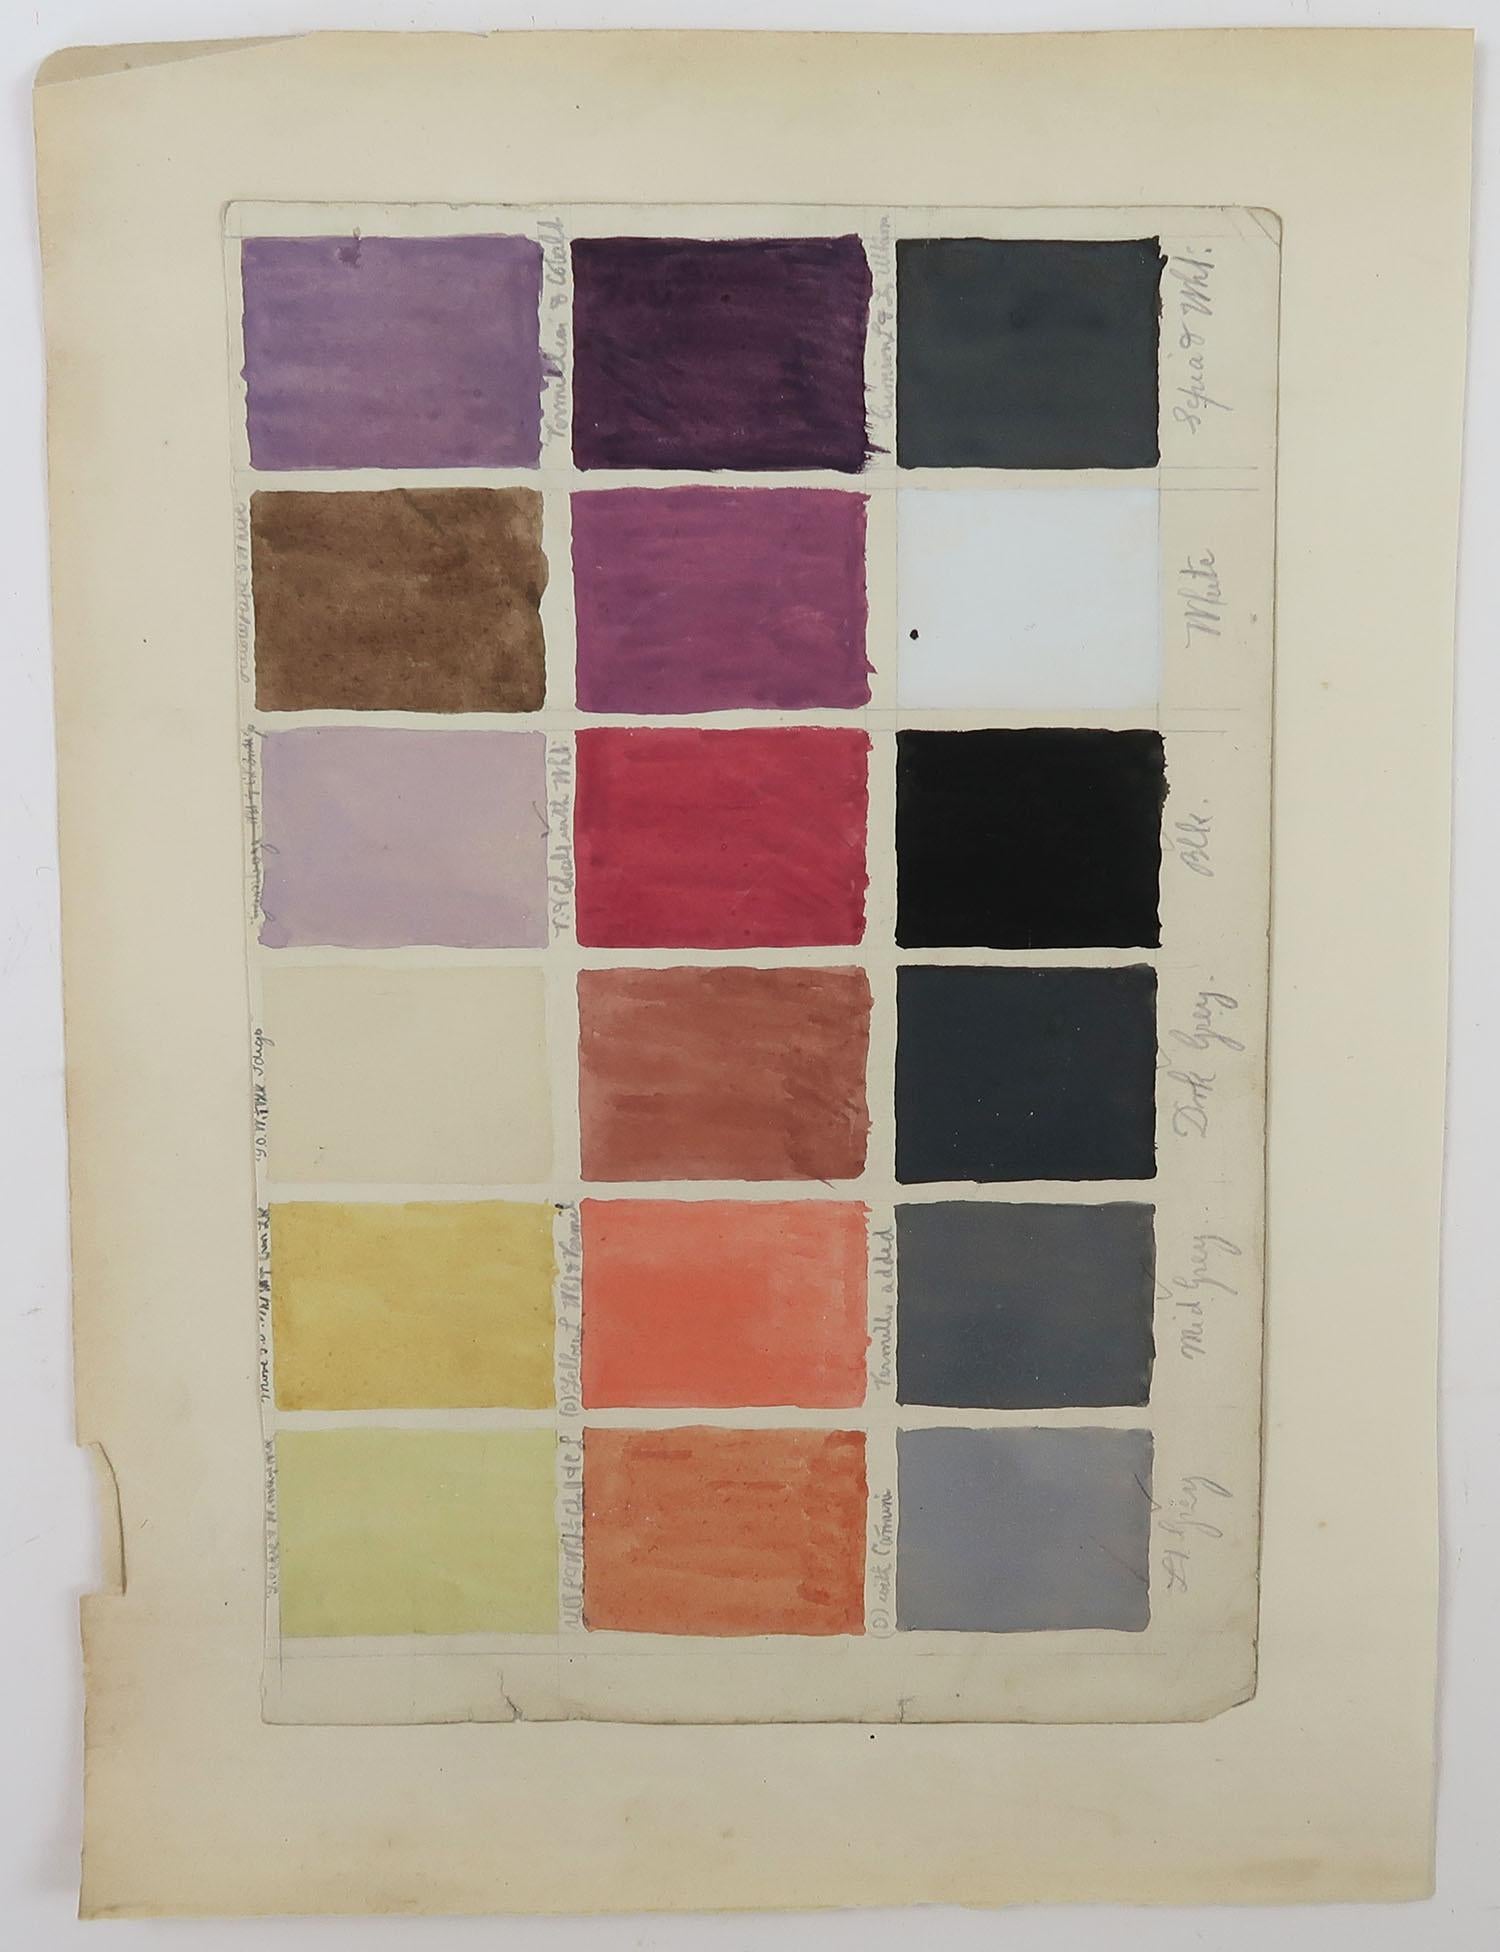 Paper Original Artwork from a Student of Textile Design, 1897